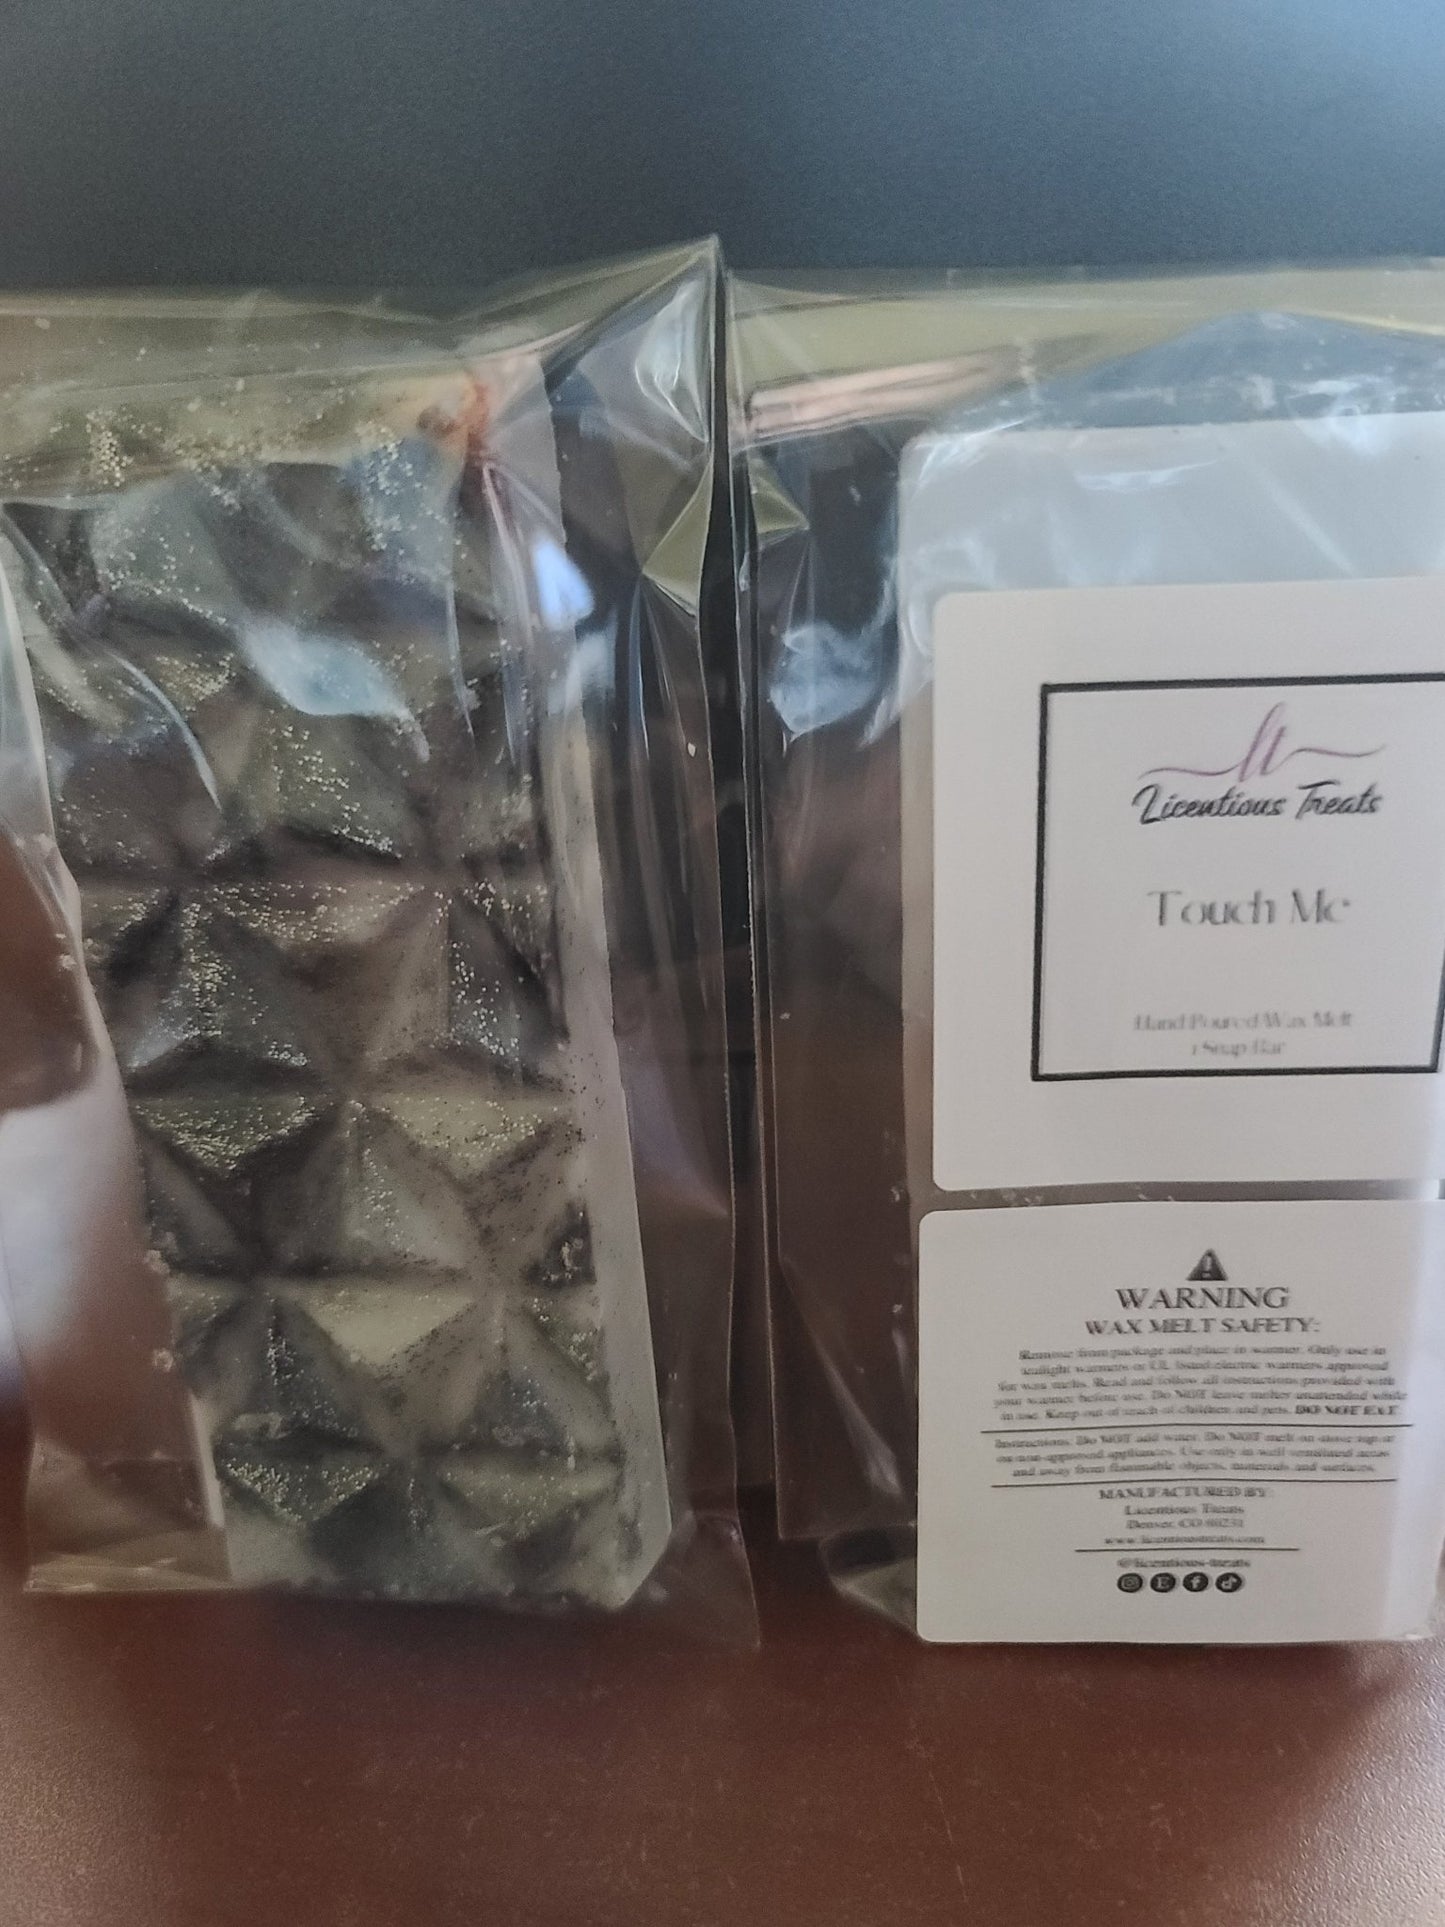 Wax Melts - Touch Me - Licentious TreatsWax Melts - Touch Me